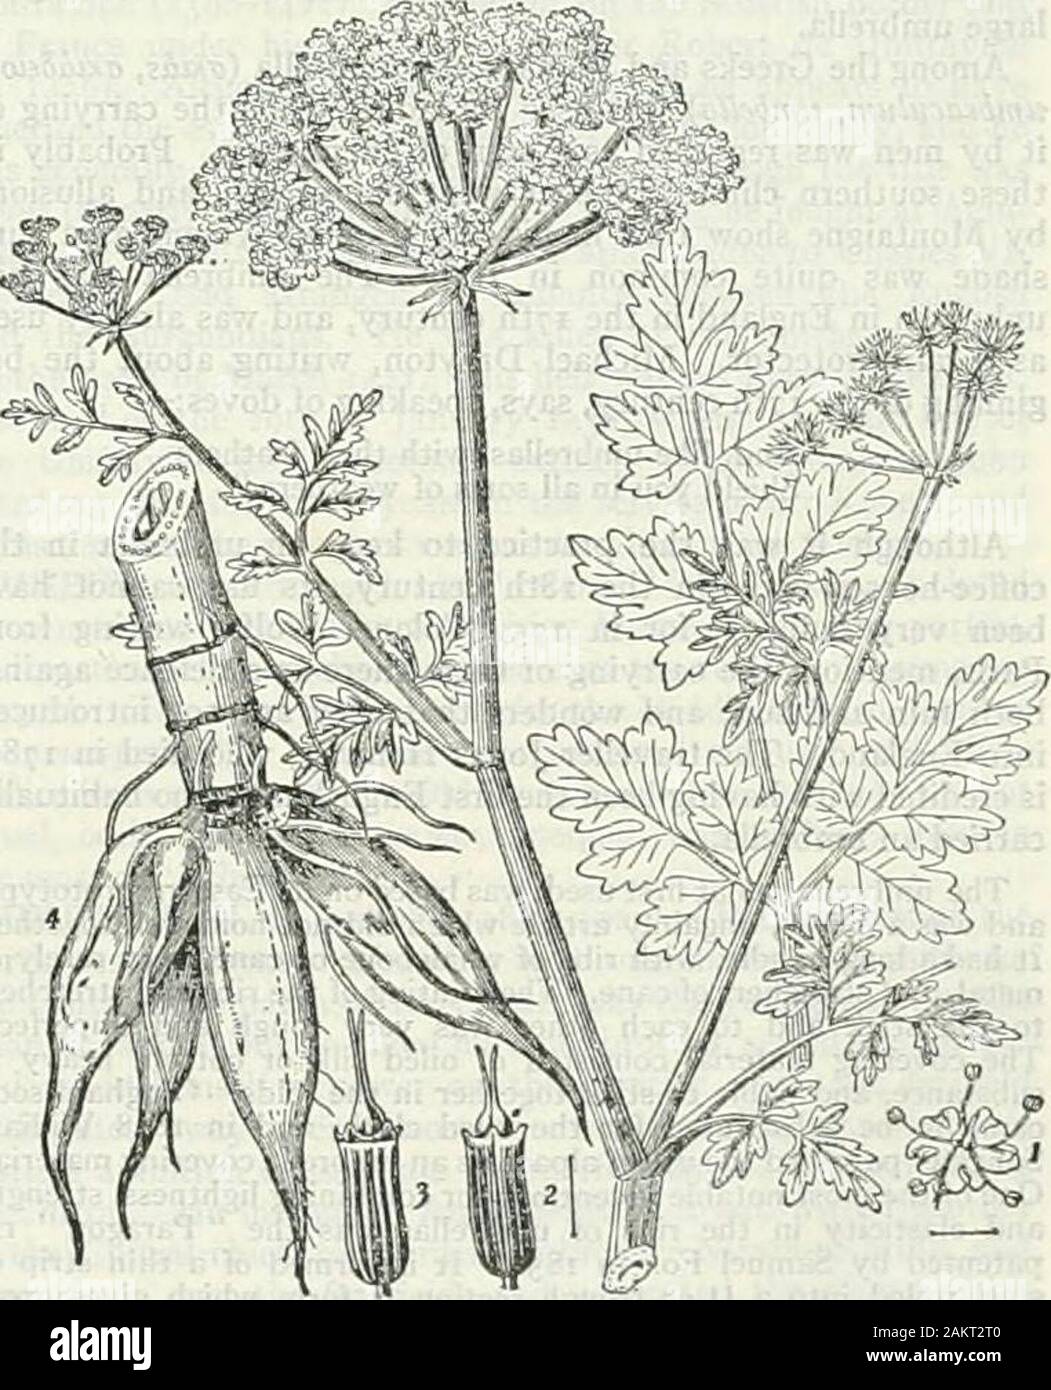 The encyclopædia britannica; a dictionary of arts, sciences, literature and general information . Pic. 4. ^Water Dropwort, Oenanthe crocala, with thickened root fibres, about half nat. size.I, Flower;2and3,Side and front view of fruit; enlarged,(fools parsley, q.v.). Angelica (q.v.), Peuccdanum (hcgs fennel,parsnip, q.v.), Heracleum (hogwced), Daucus (carrot). Pelroseltnumsativum is common parsley i,g.v.). 576 UMBER—UMBRIA UMBER, a brown mineral pigment consisting of hydrated ironand manganese oxides. The finely-powdered mineral is knownas raw umber; when calcined the beauty of the colour incr Stock Photo